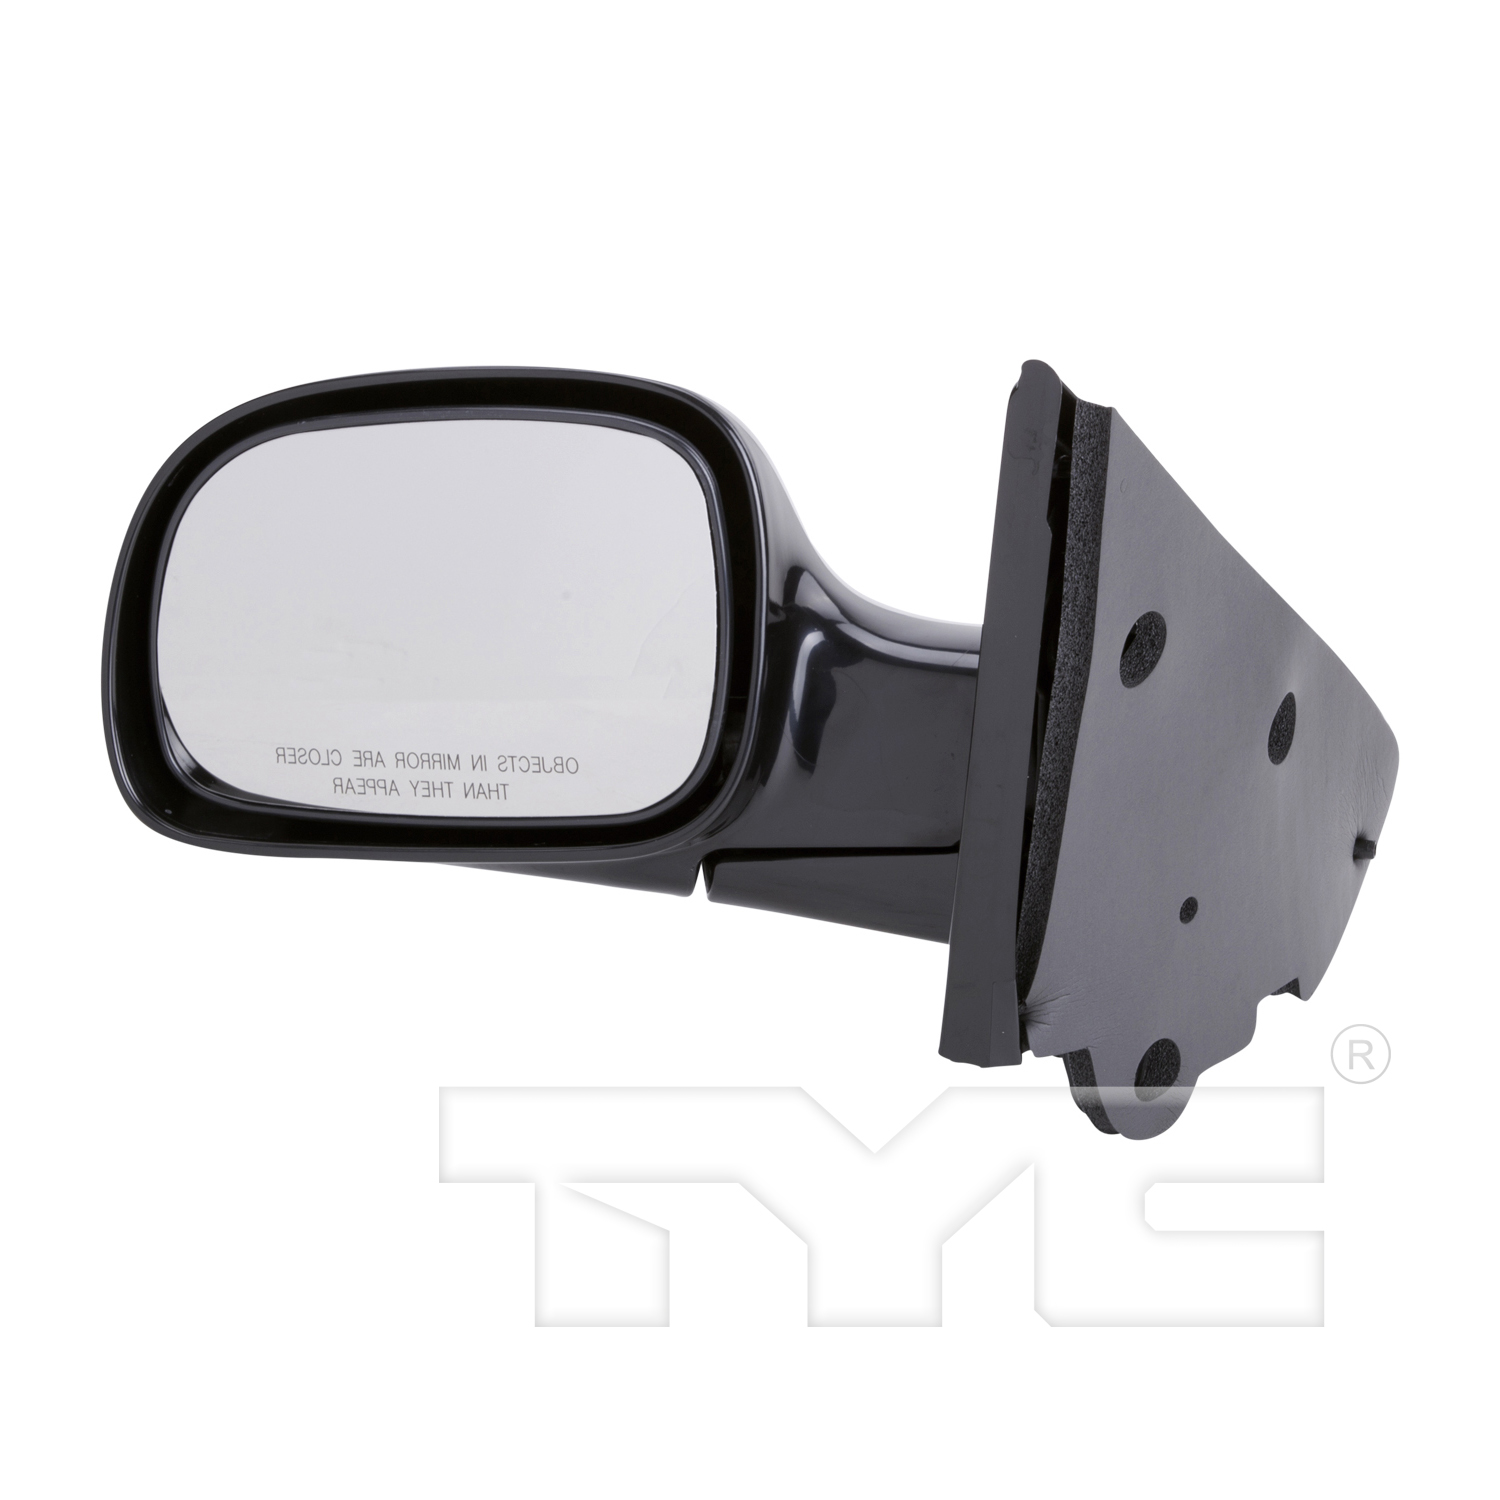 Aftermarket MIRRORS for CHRYSLER - TOWN & COUNTRY, TOWN & COUNTRY,01-07,LT Mirror outside rear view